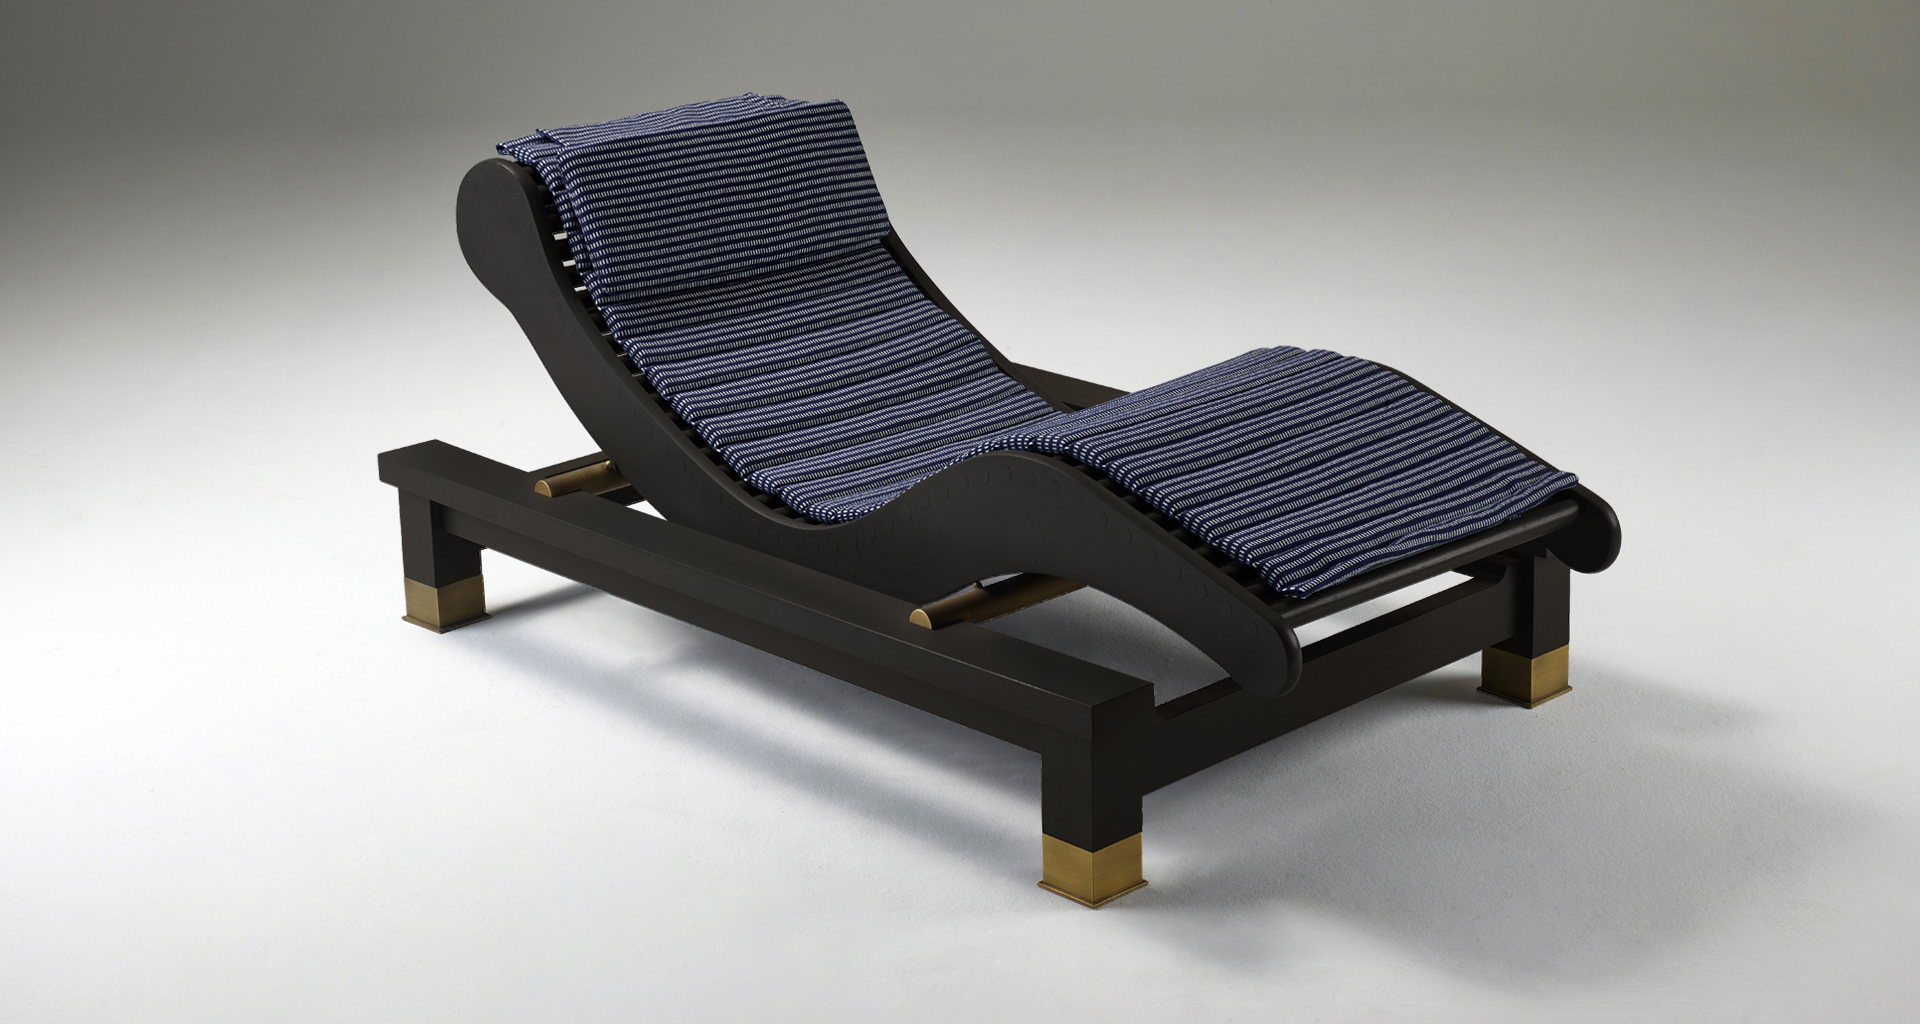 Belvedere is an outdoor wooden chaise longue-dormeuse with okumé and bronze details, from Promemoria's outrdoor catalogue | Promemoria